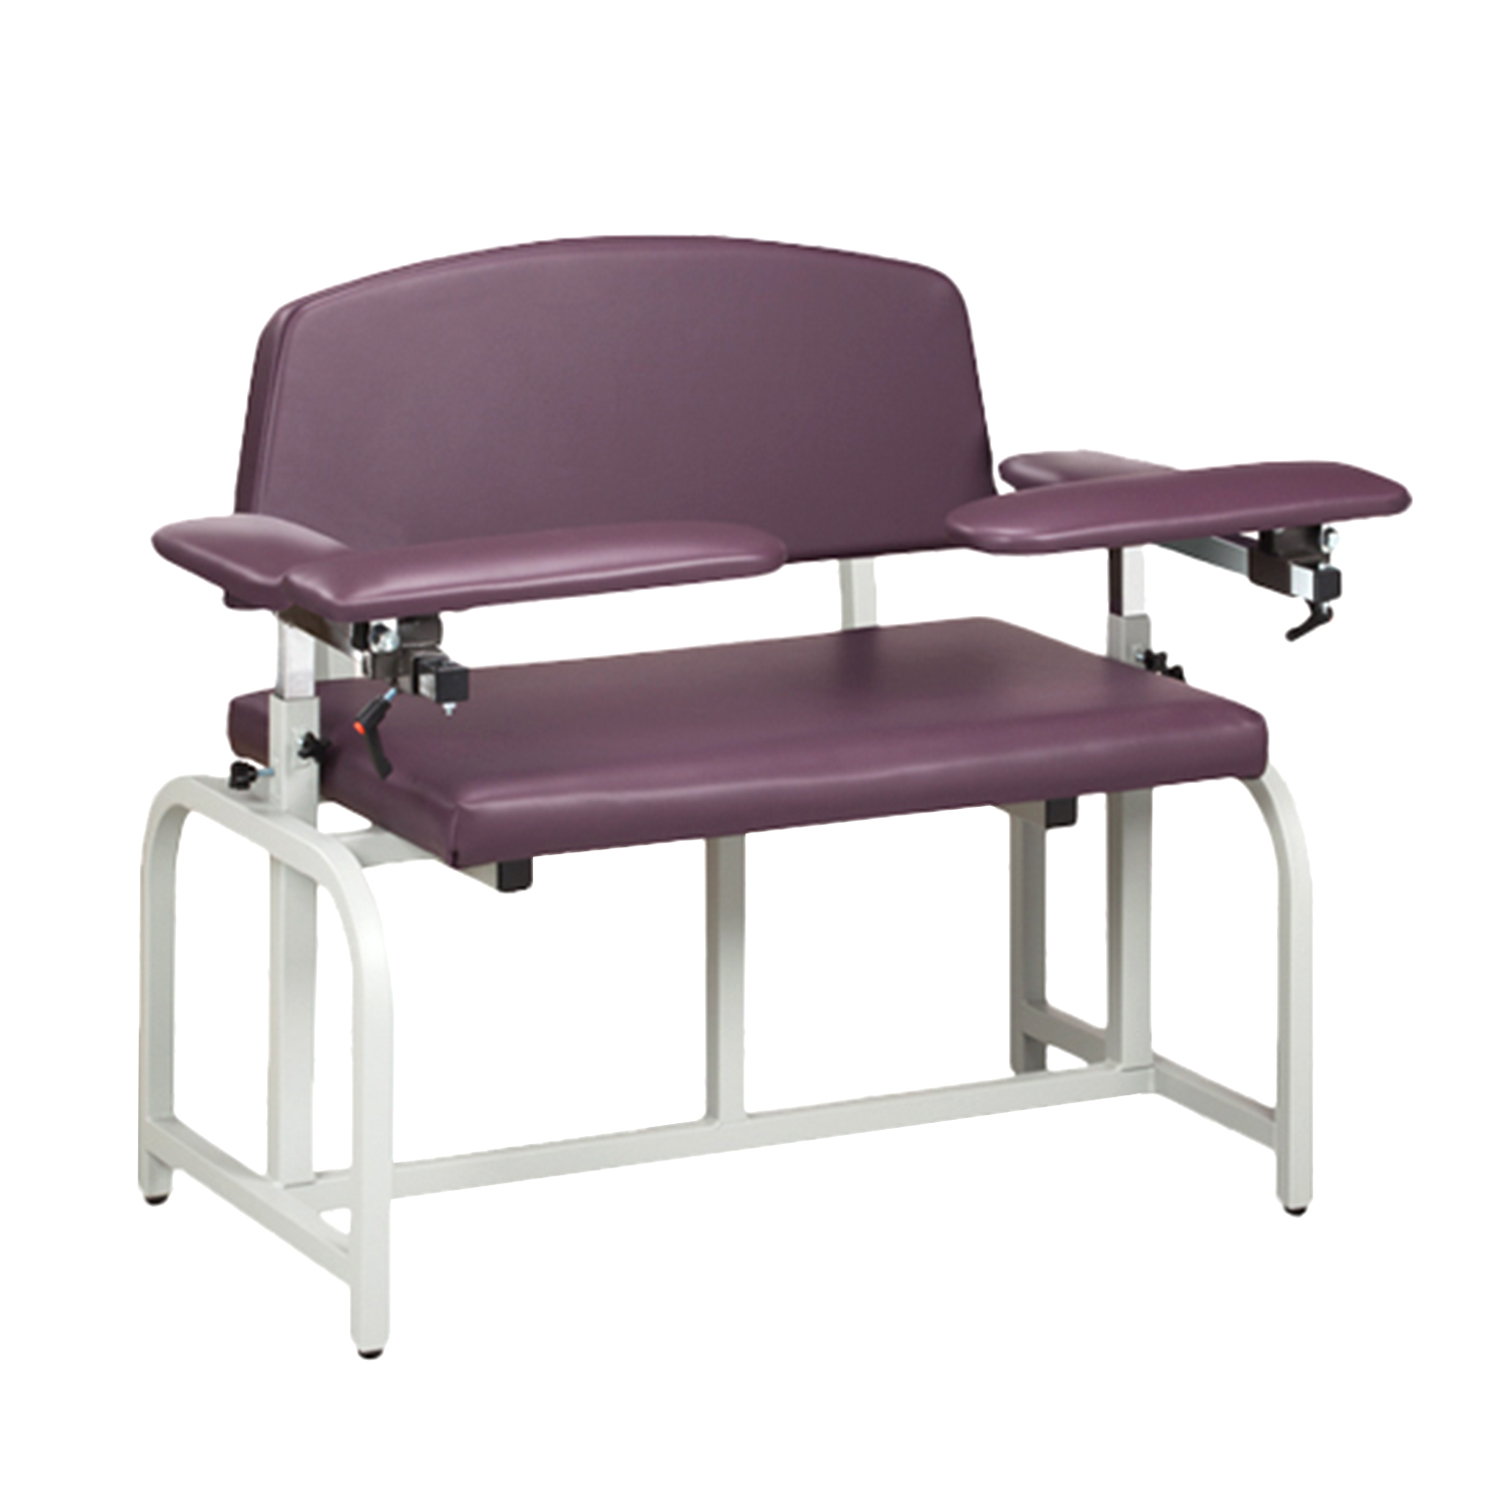 Clinton Lab X Series Extra-Wide Phlebotomy Chair - 66000B